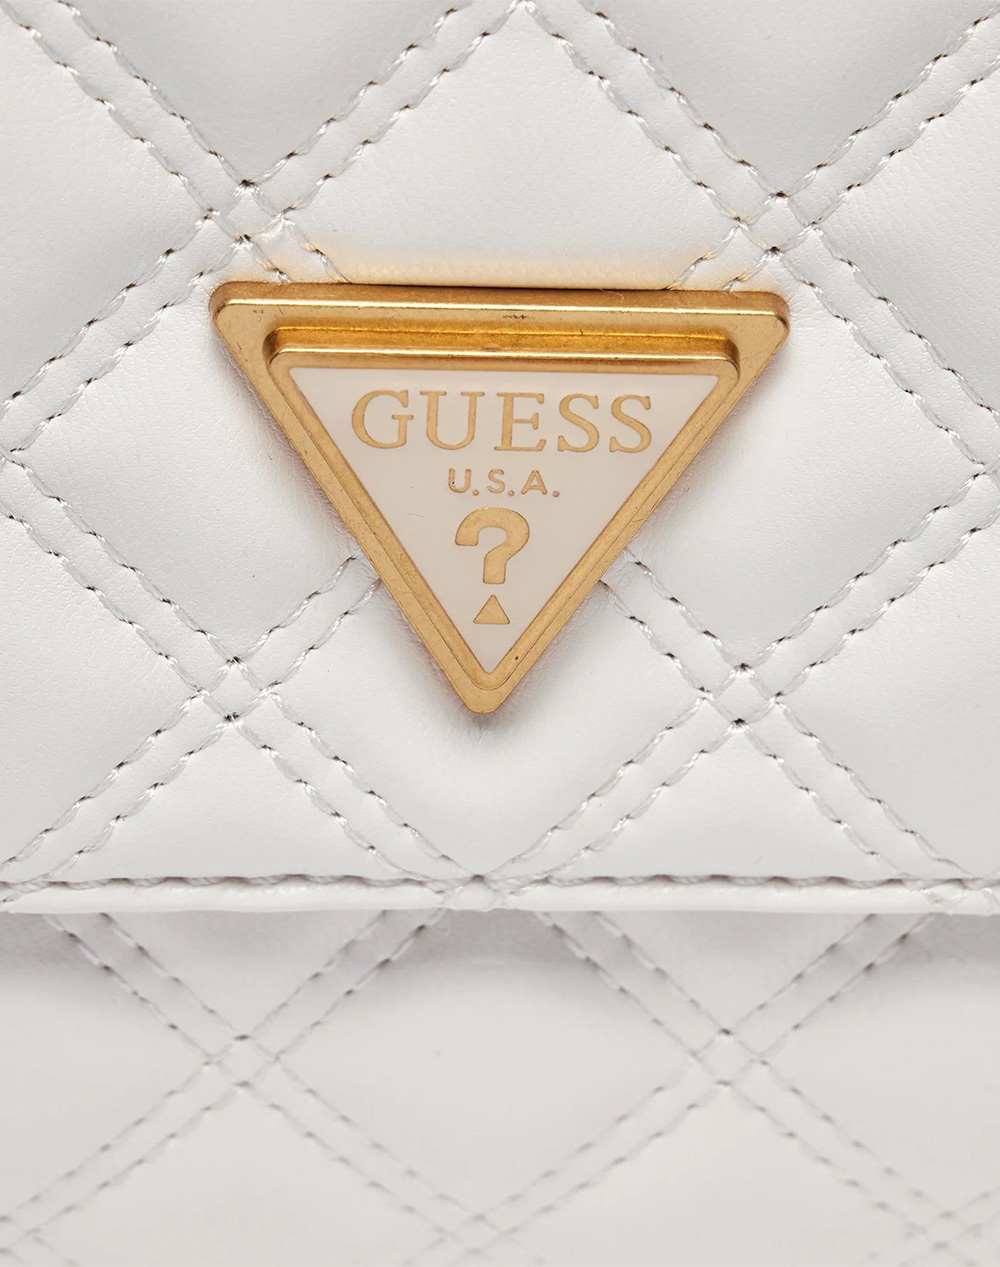 GUESS GIULLY CONVERTIBLE XBODY FLAP ΤΣΑΝΤΑ ΓΥΝΑΙΚΕΙΟ (Διαστάσεις: 30 x 13 x 6 εκ)